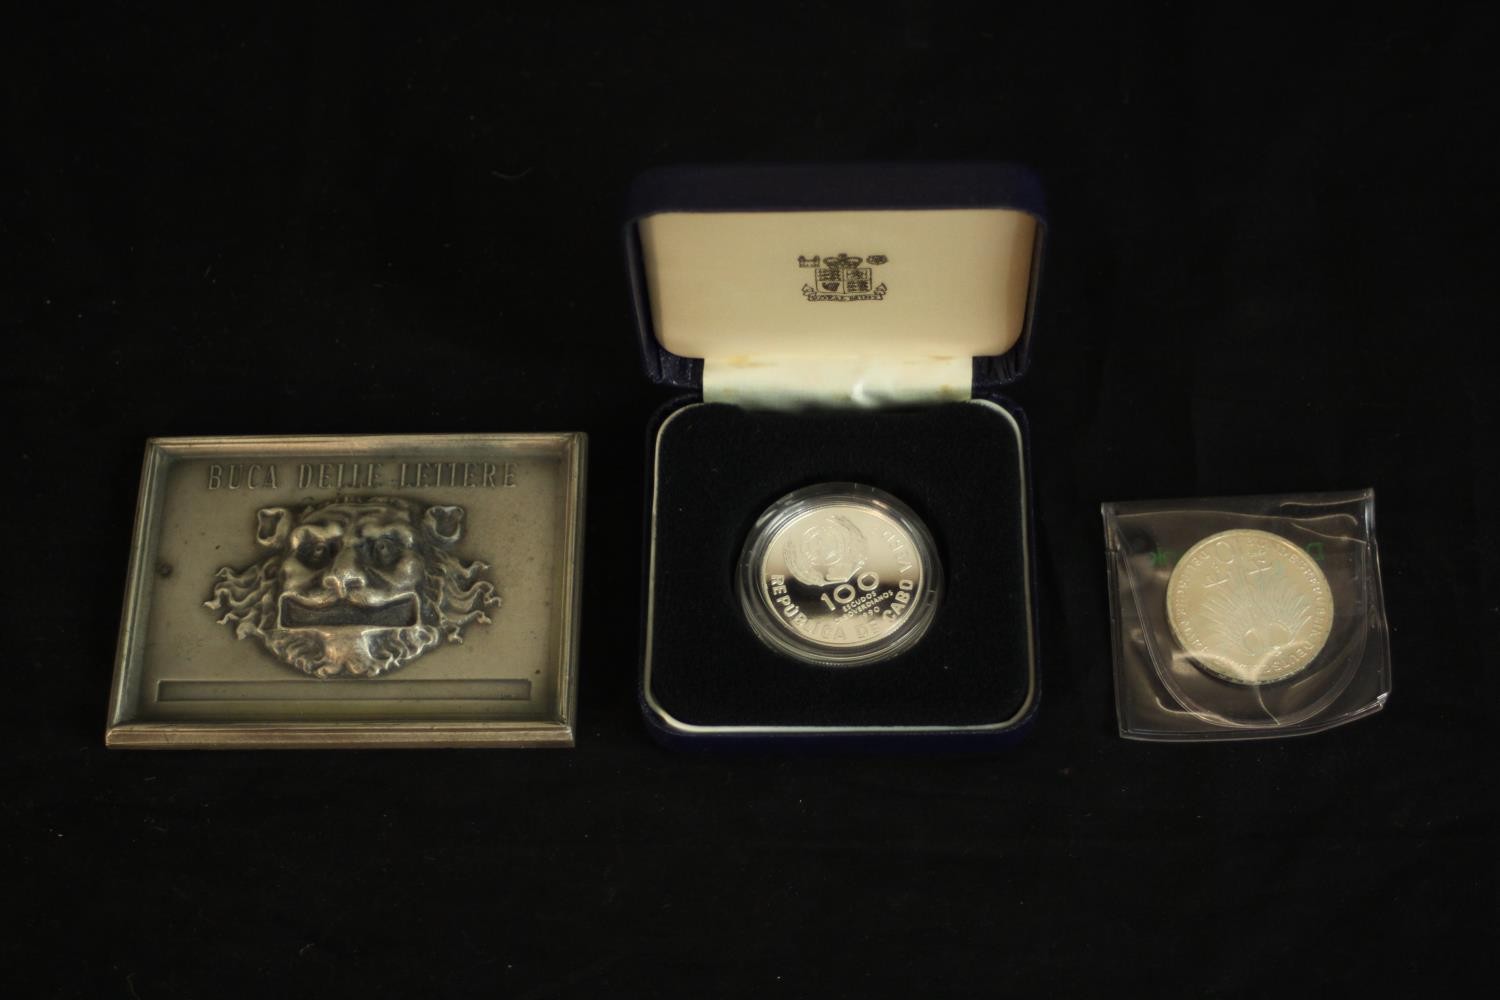 A cased 100 Escudos Papal visit silver proof coin along with a silver German coin and silver medal